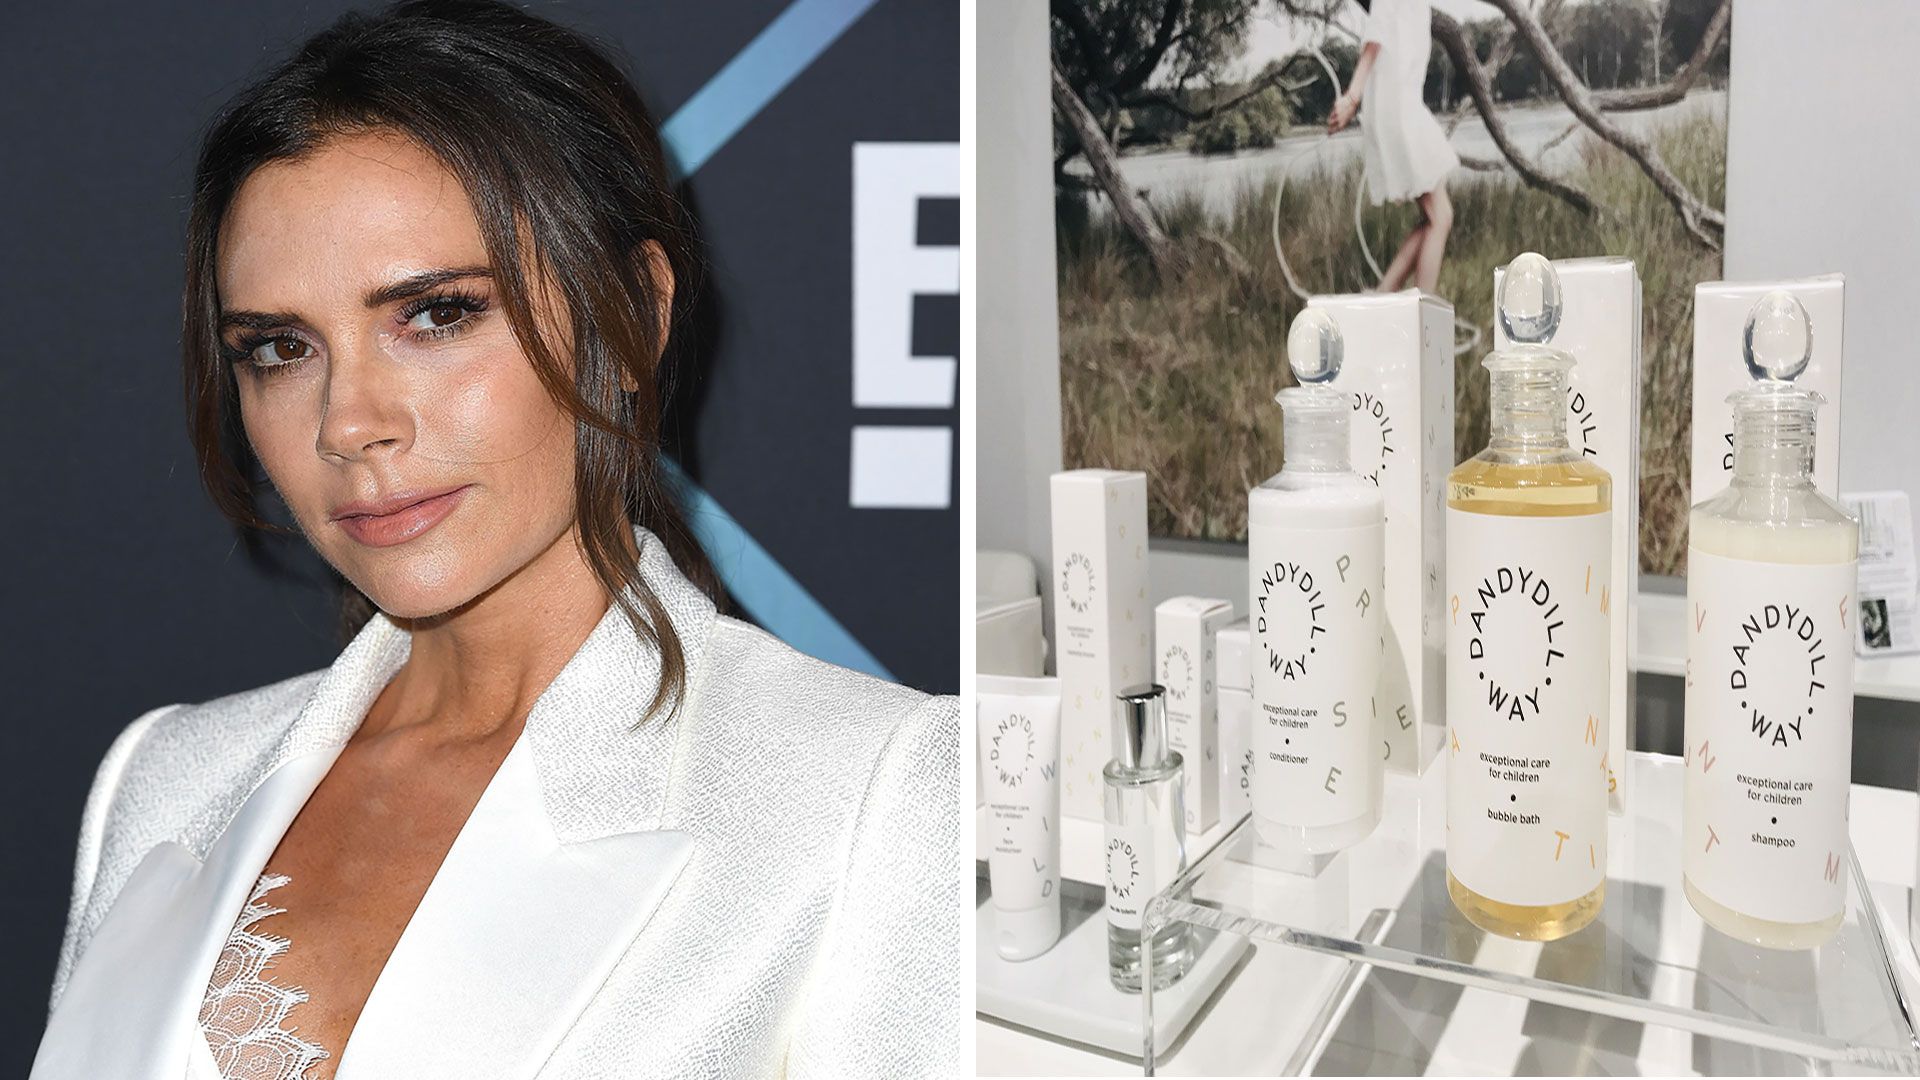 Children's perfume is now a thing - just ask Victoria Beckham